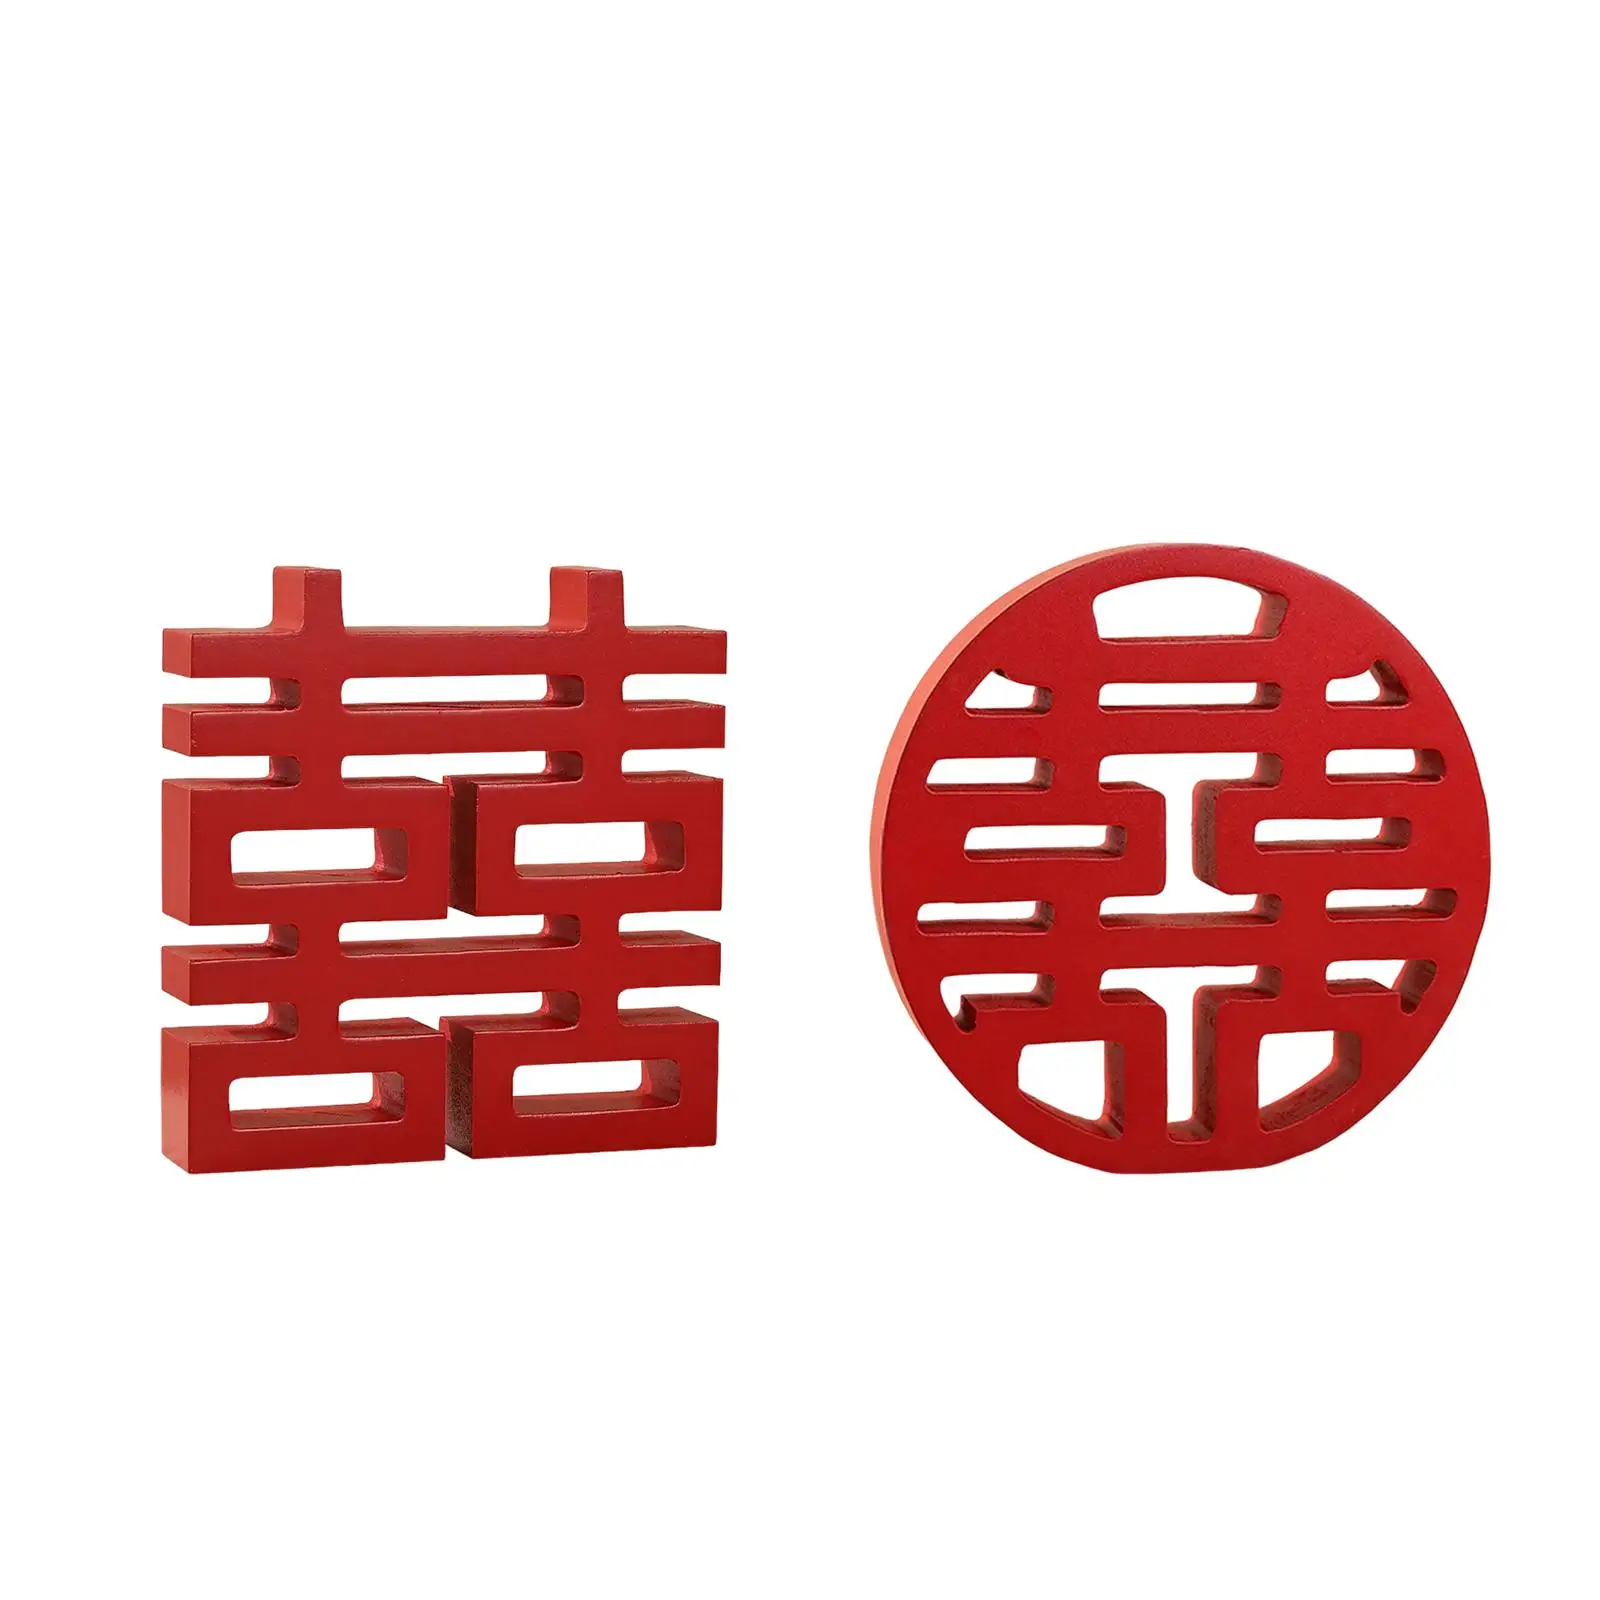 Festival Traditional Wedding Xi Chinese Character Wall Table Wooden Ornaments Living Room Decor Decorative Creative Portable DIY